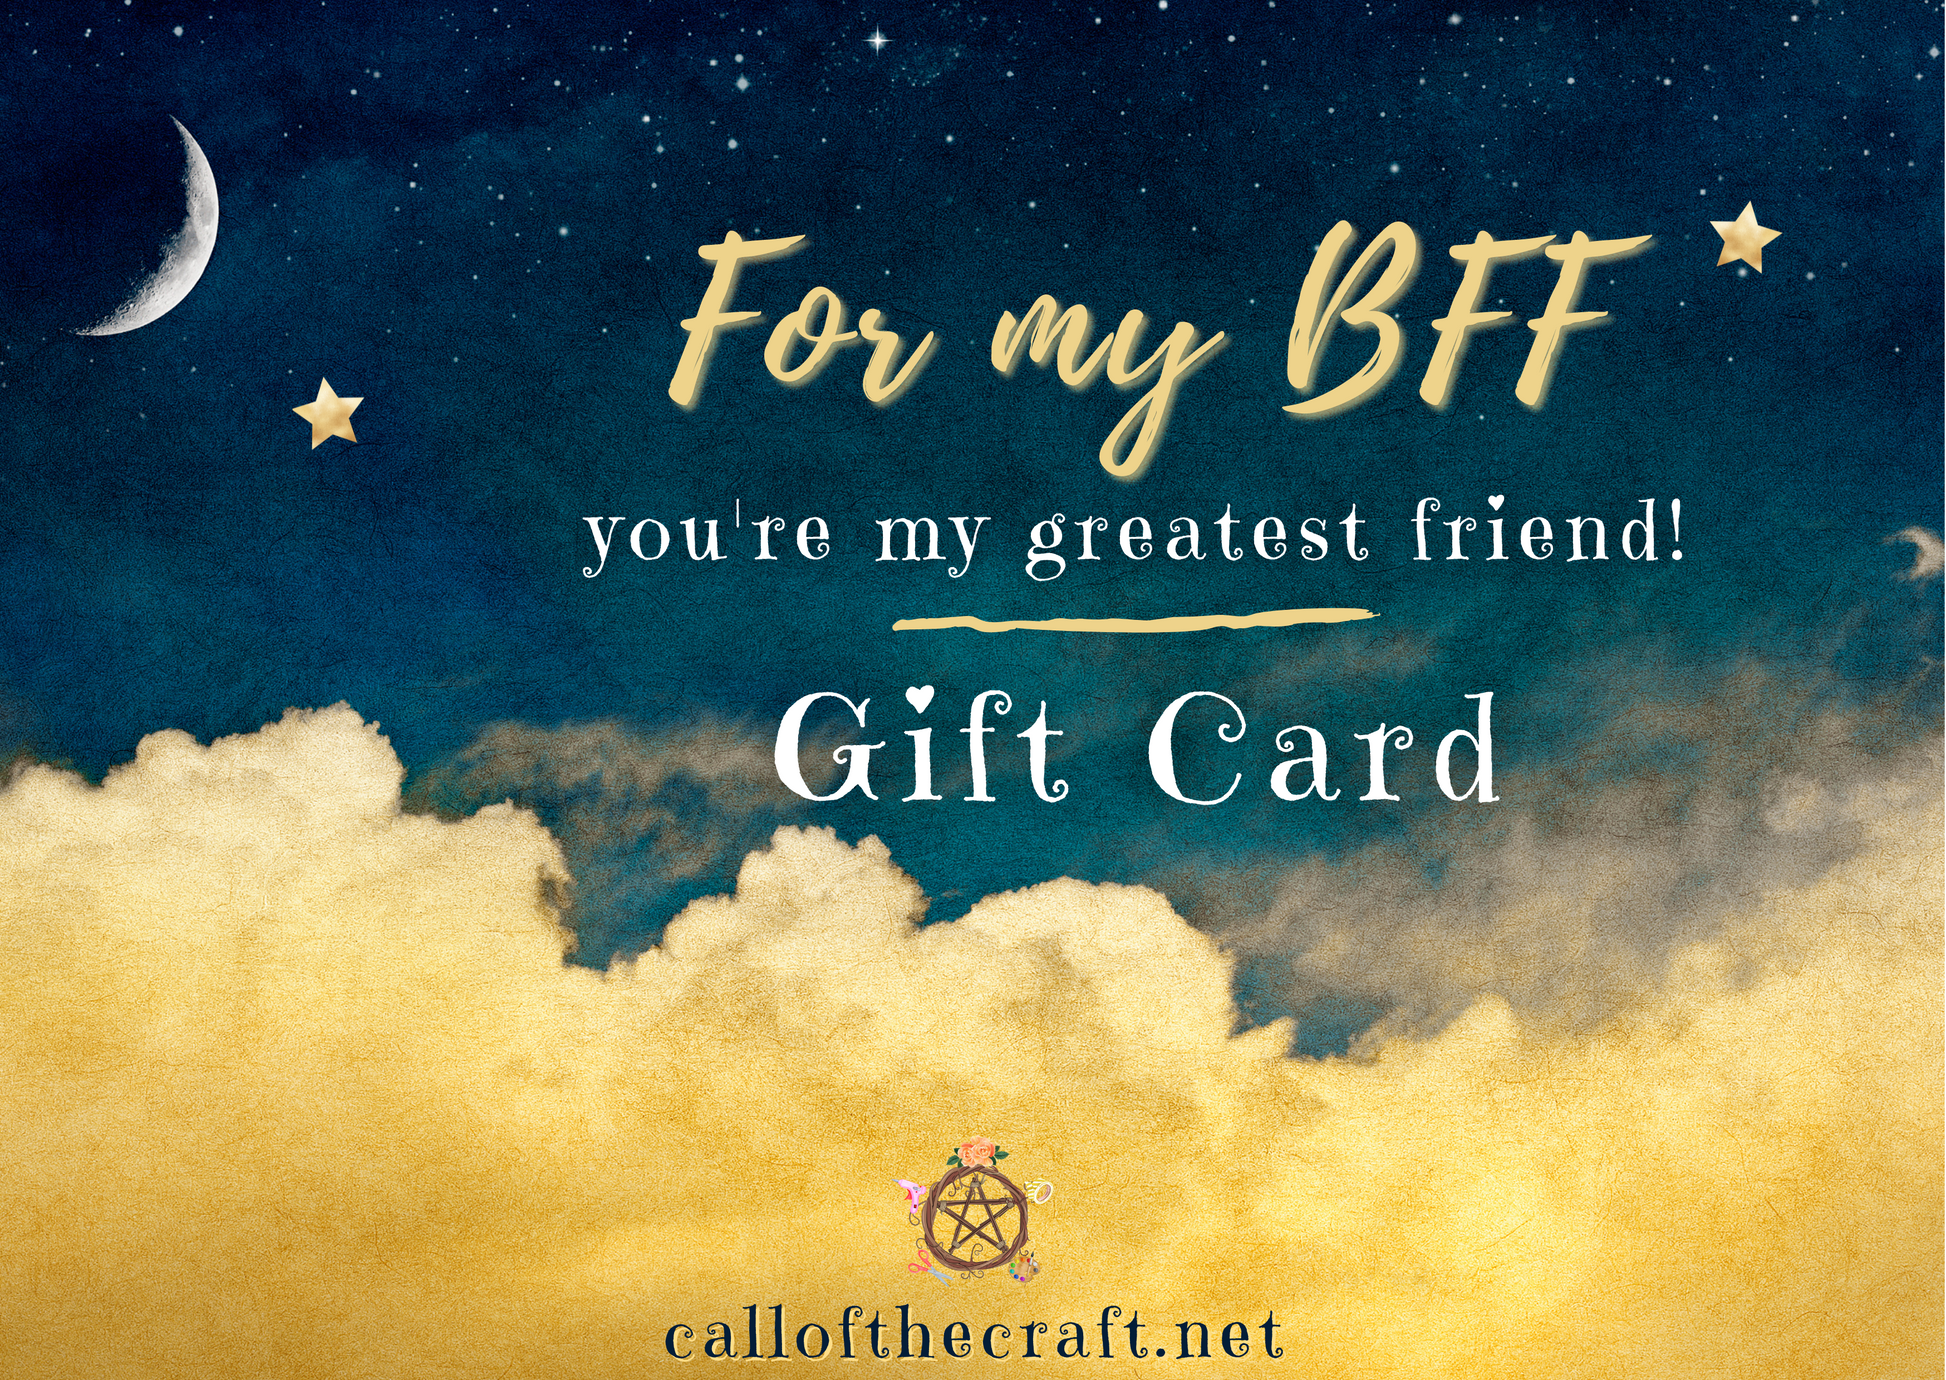 For My Best Friend Gift Card - The Call of the Craft